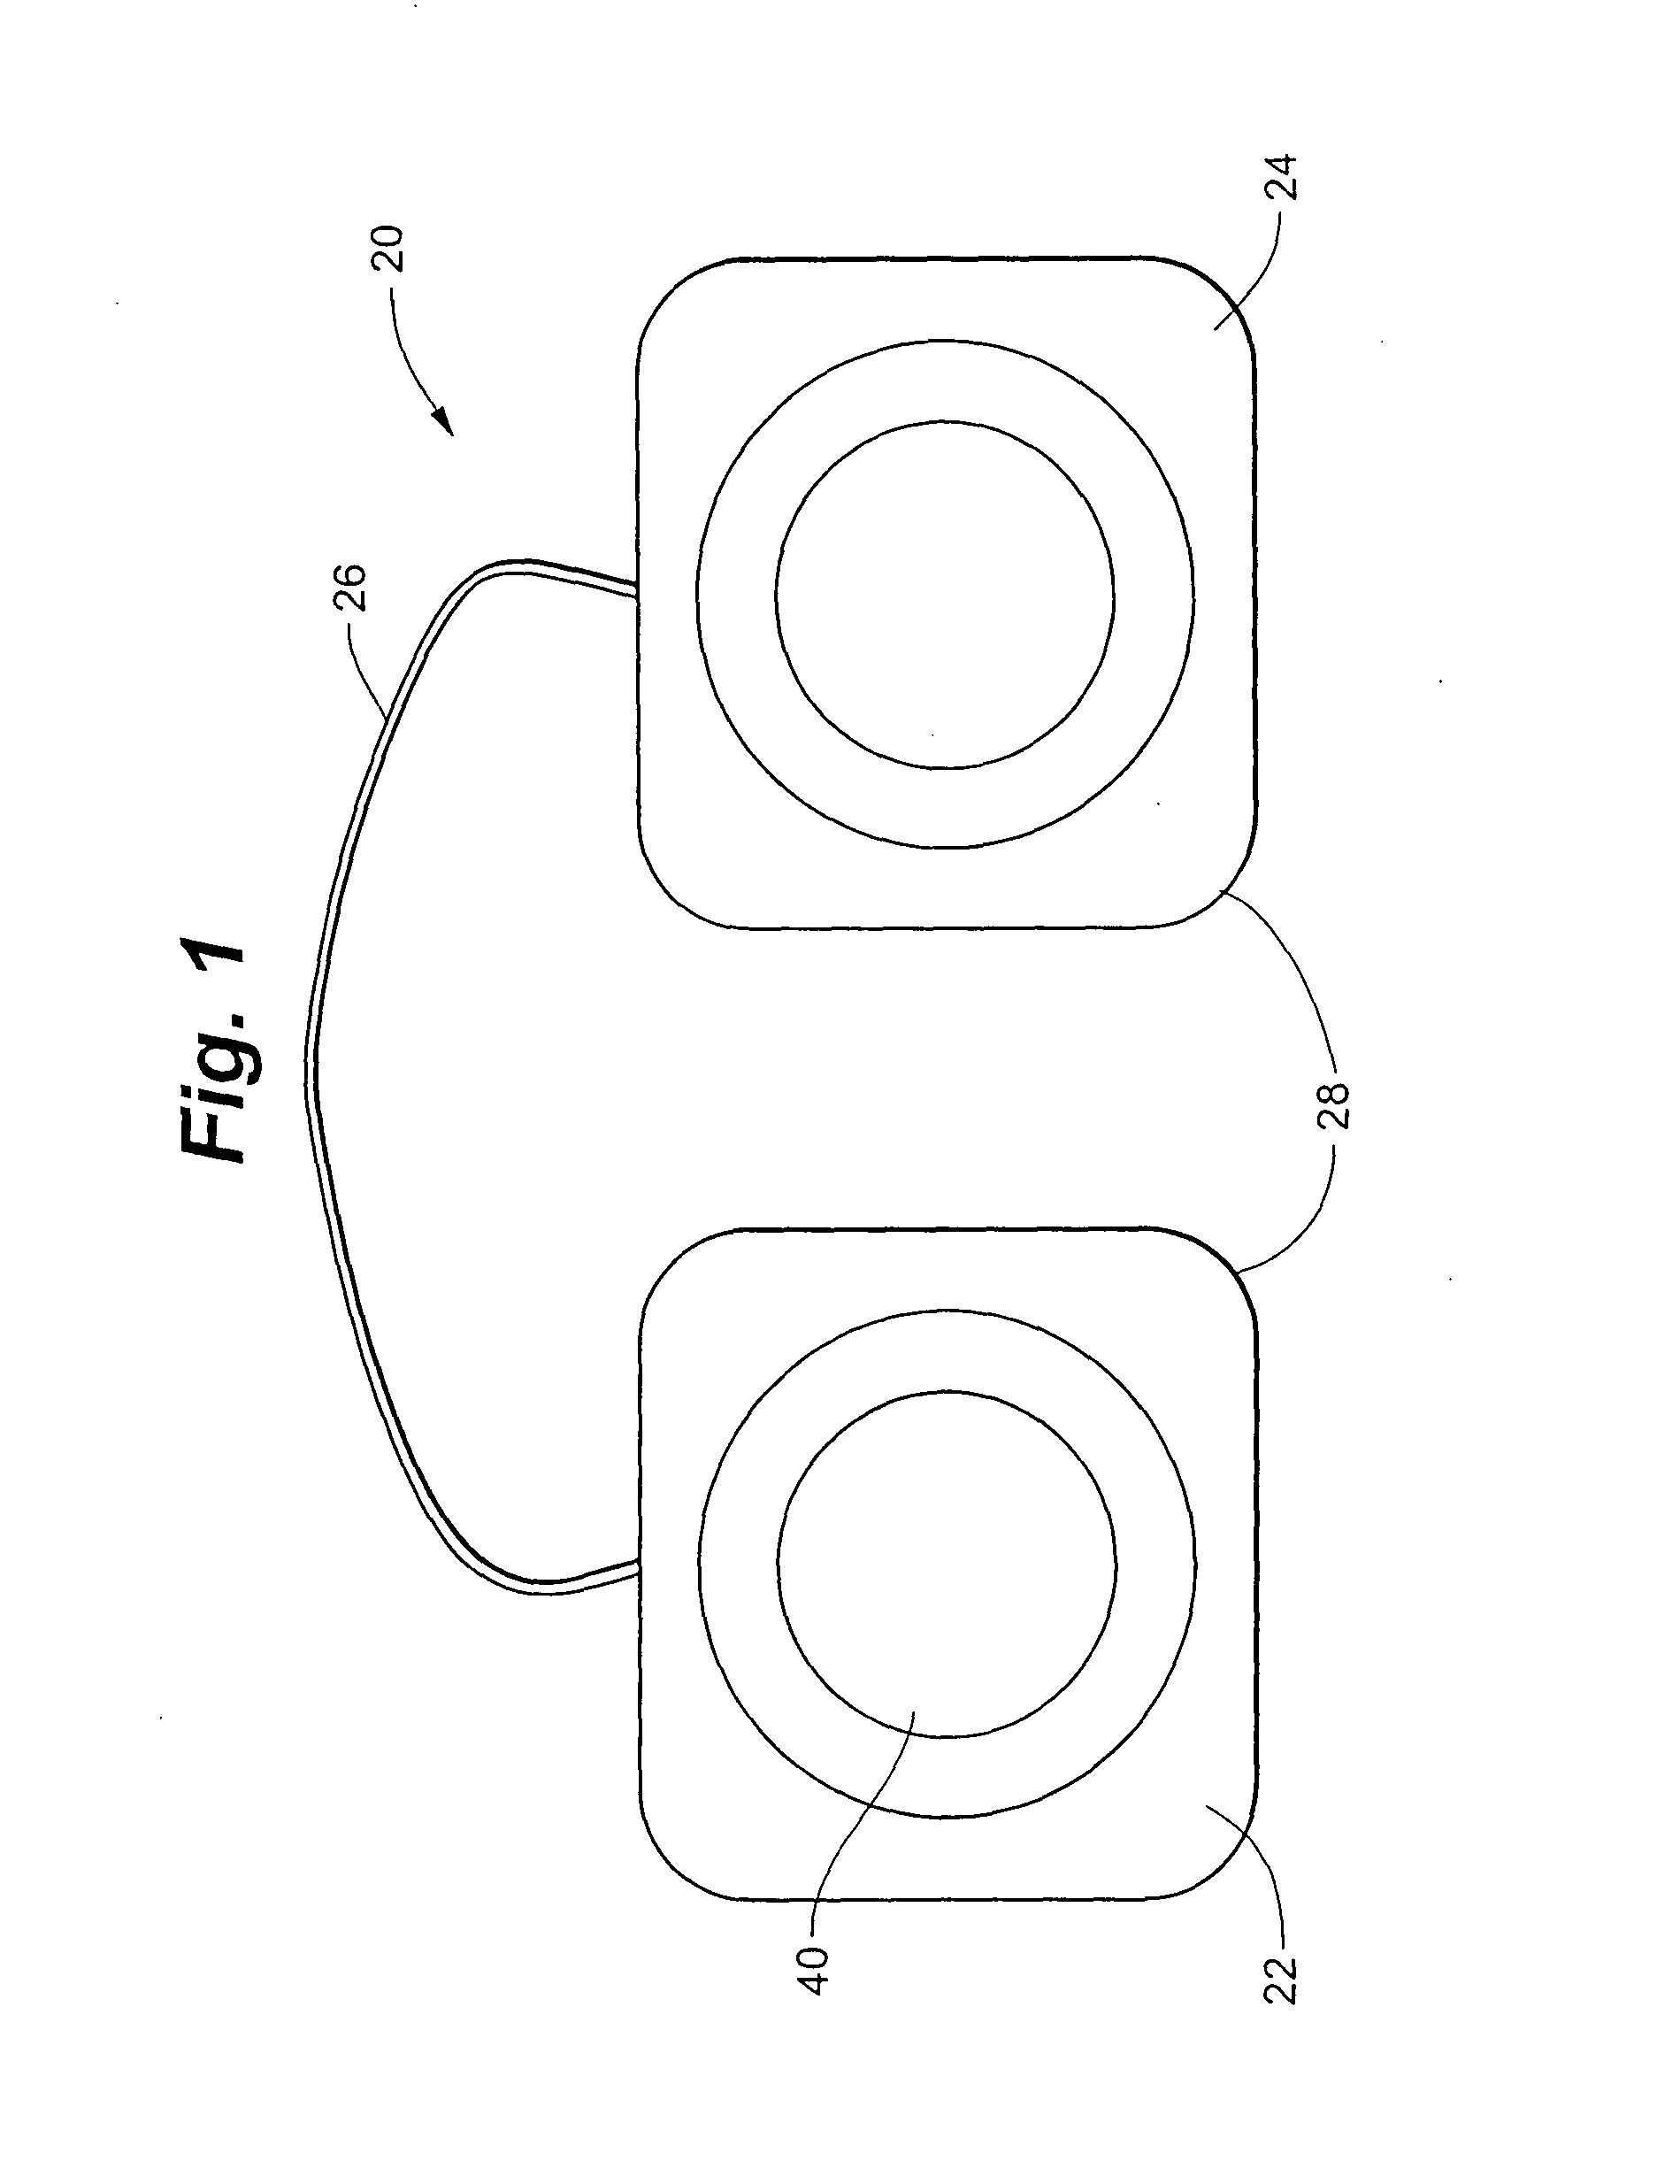 Electrical stimulation device and method for therapeutic treatment and pain management